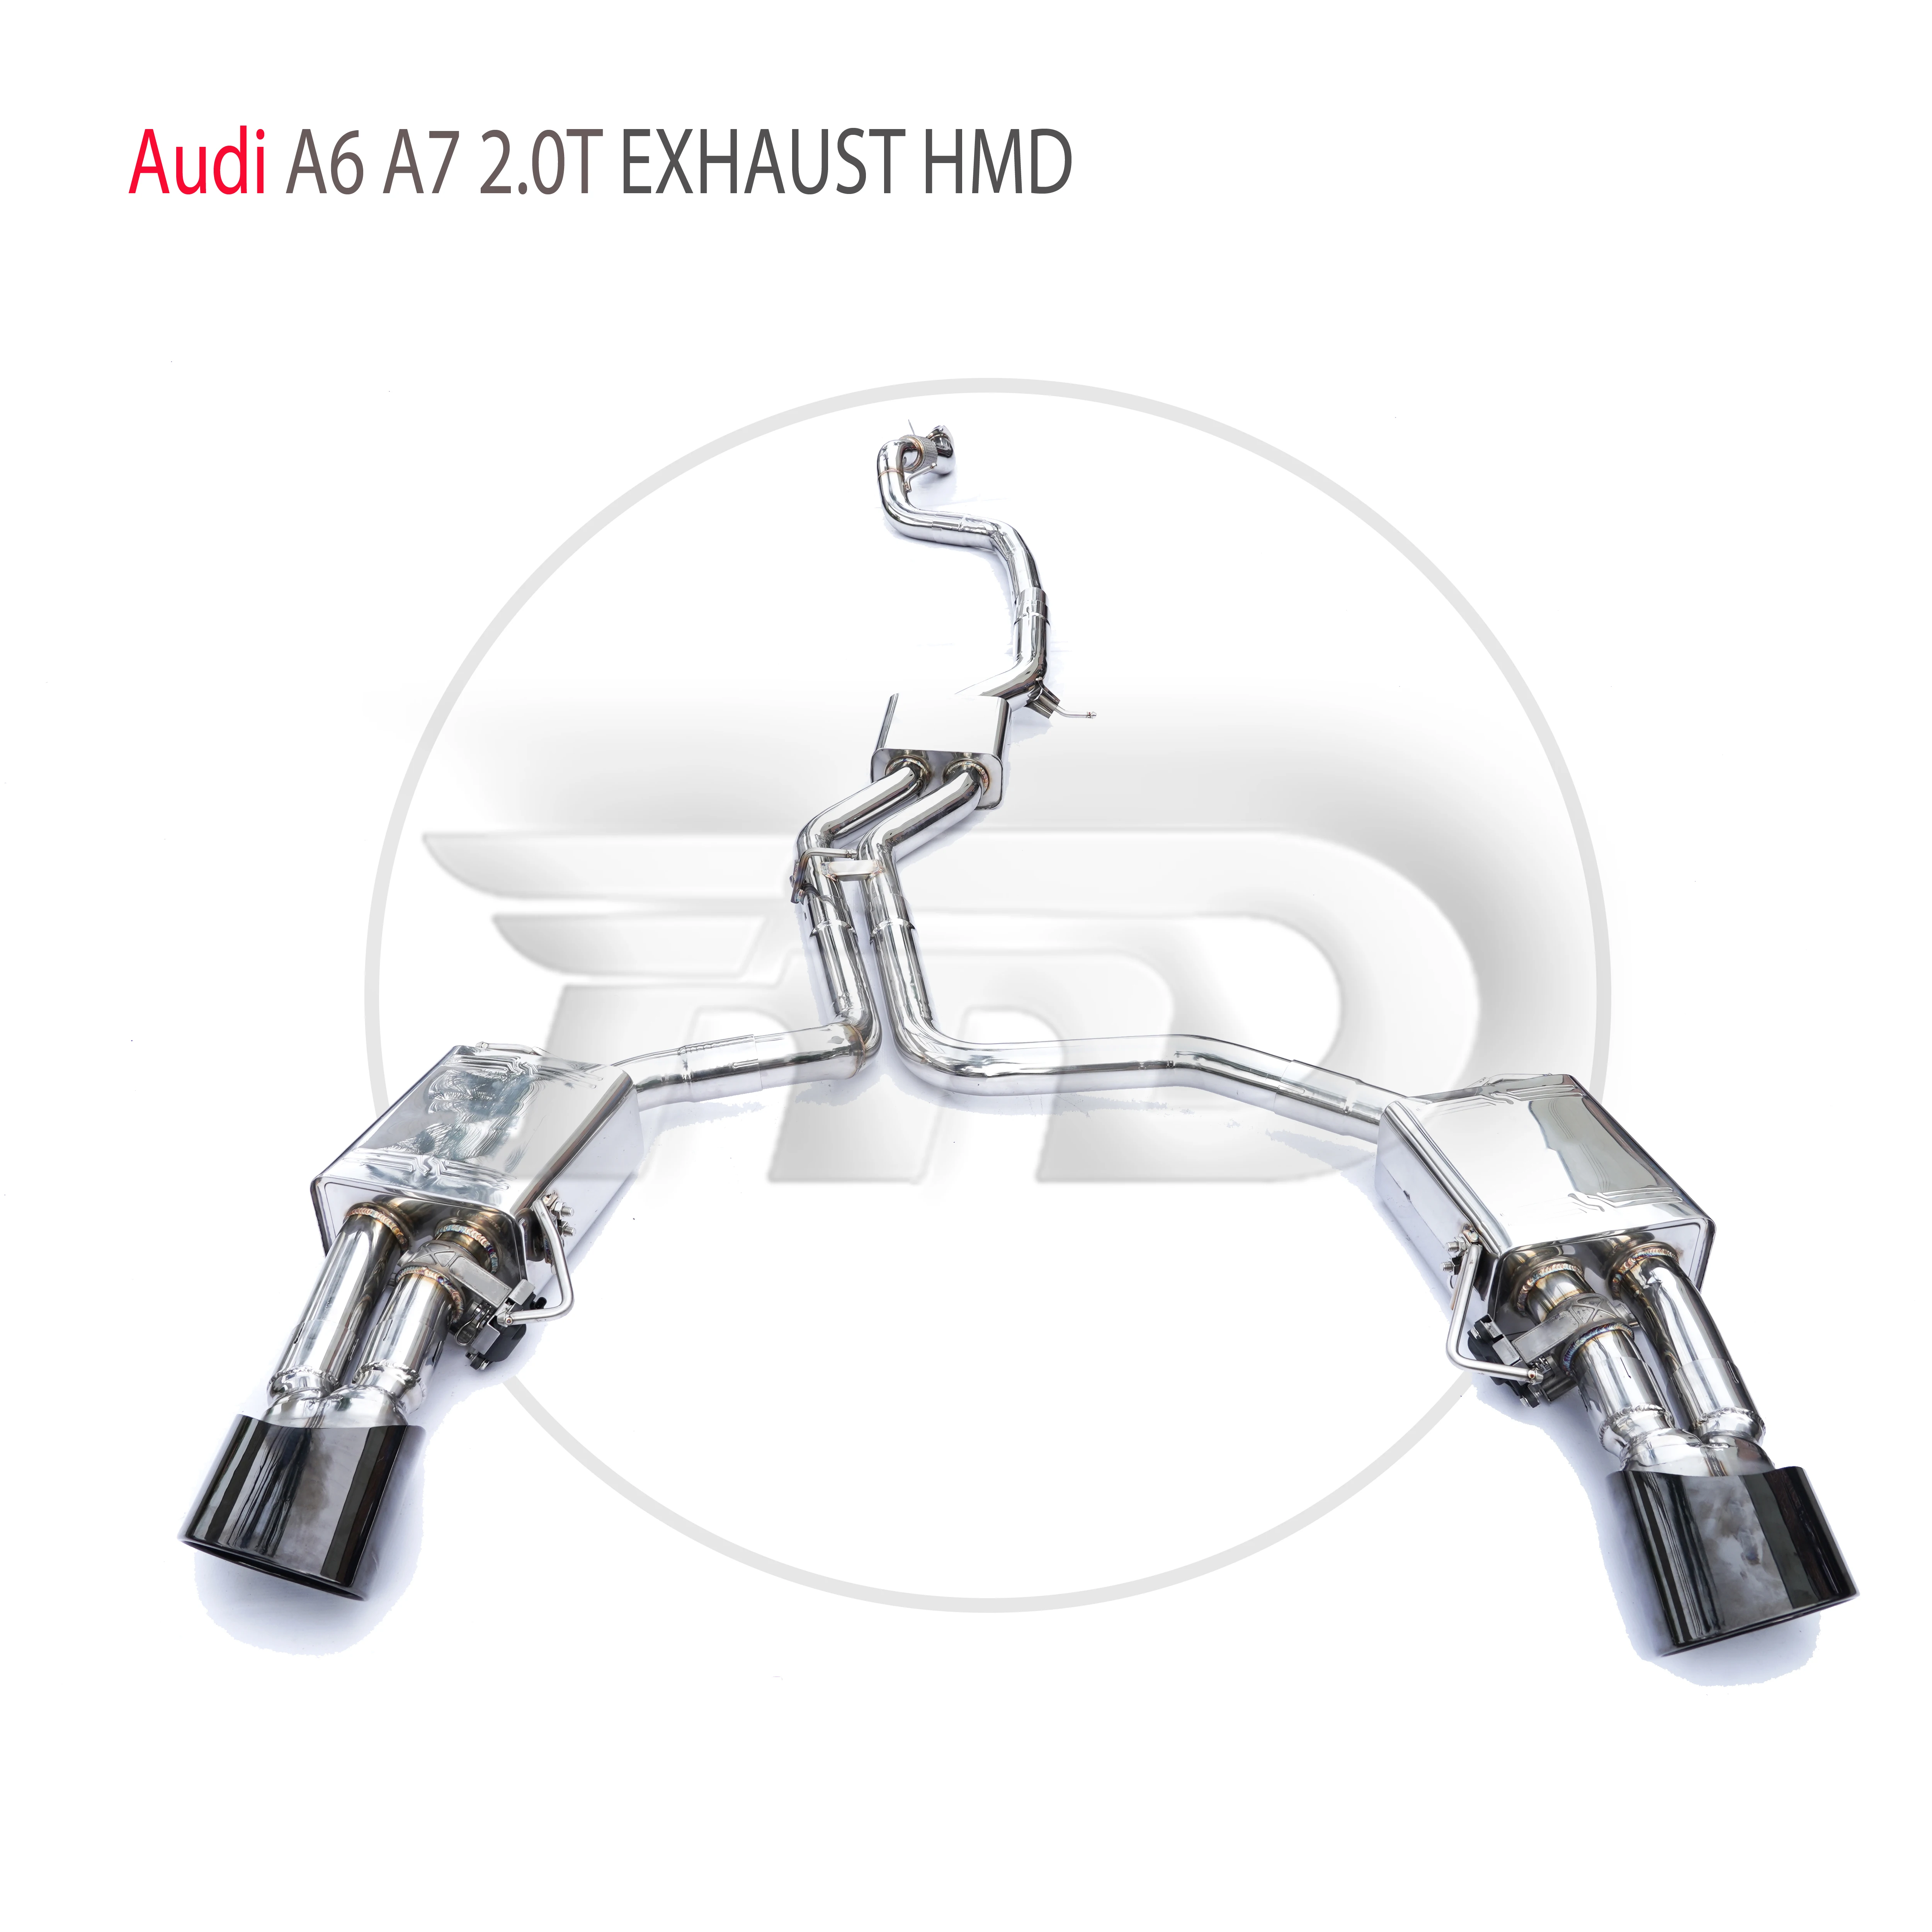 

HMD Stainless Steel Exhaust System Performance Catback for Audi A6 A7 C8 2.0T Auto Accesorios Valve Muffler With RS Style Tips